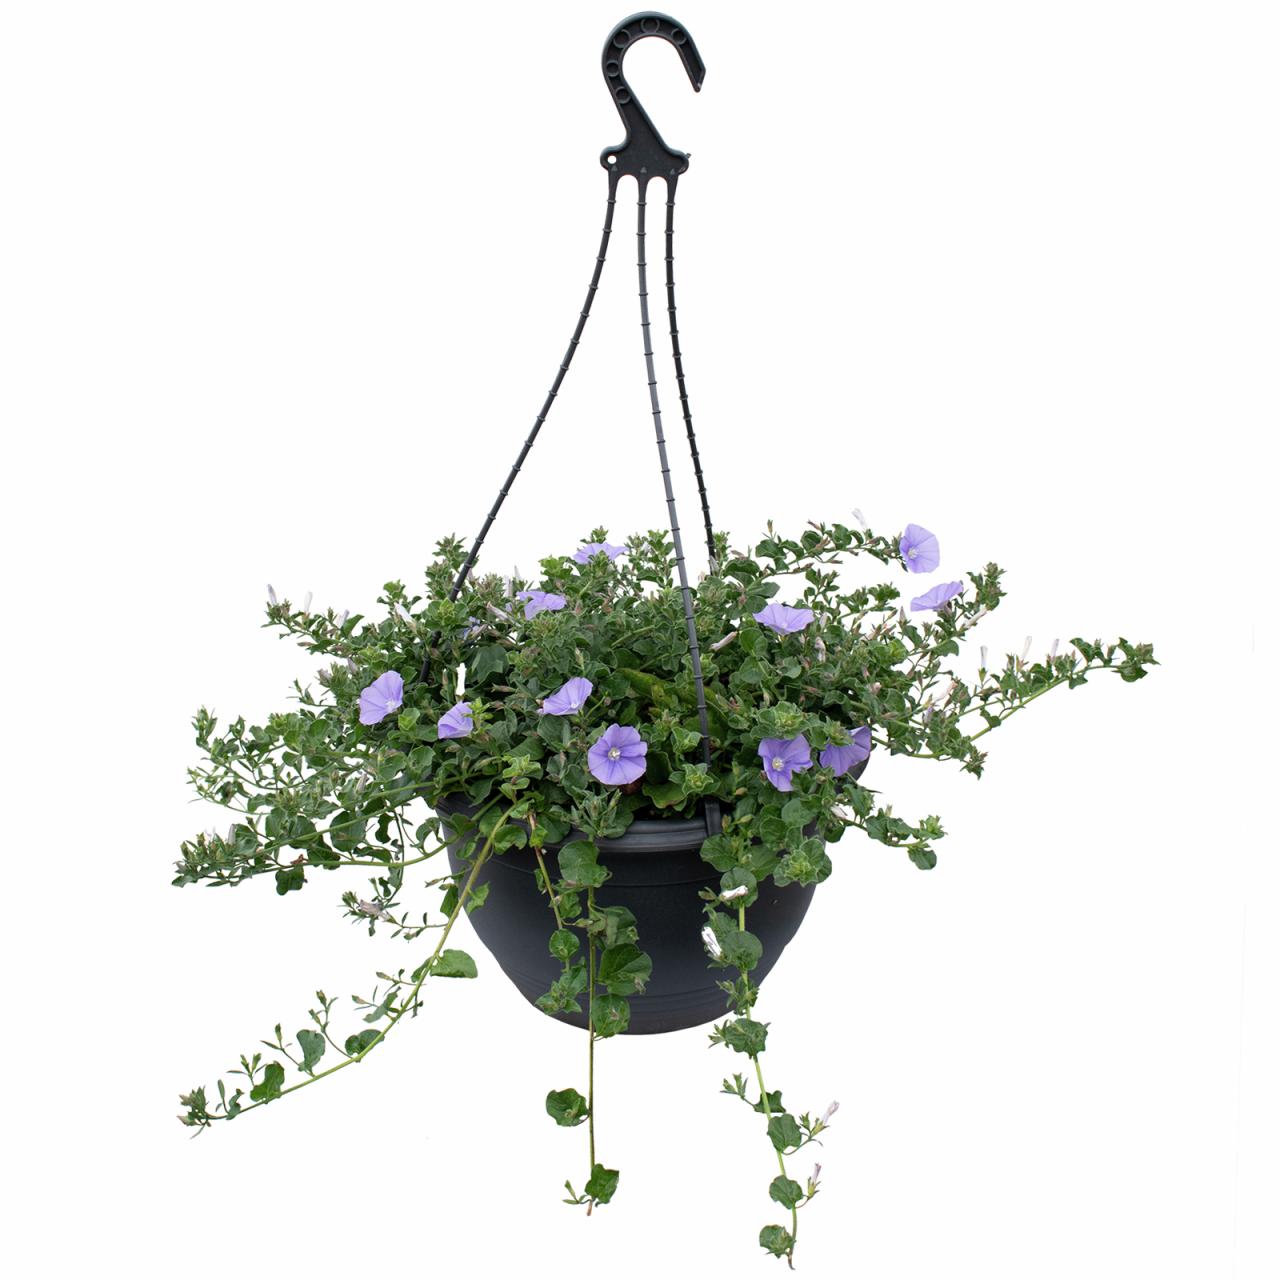 Hanging Plants Indoor | Plants for Hanging Baskets at Bunnings: Enhance Your Outdoor Decor